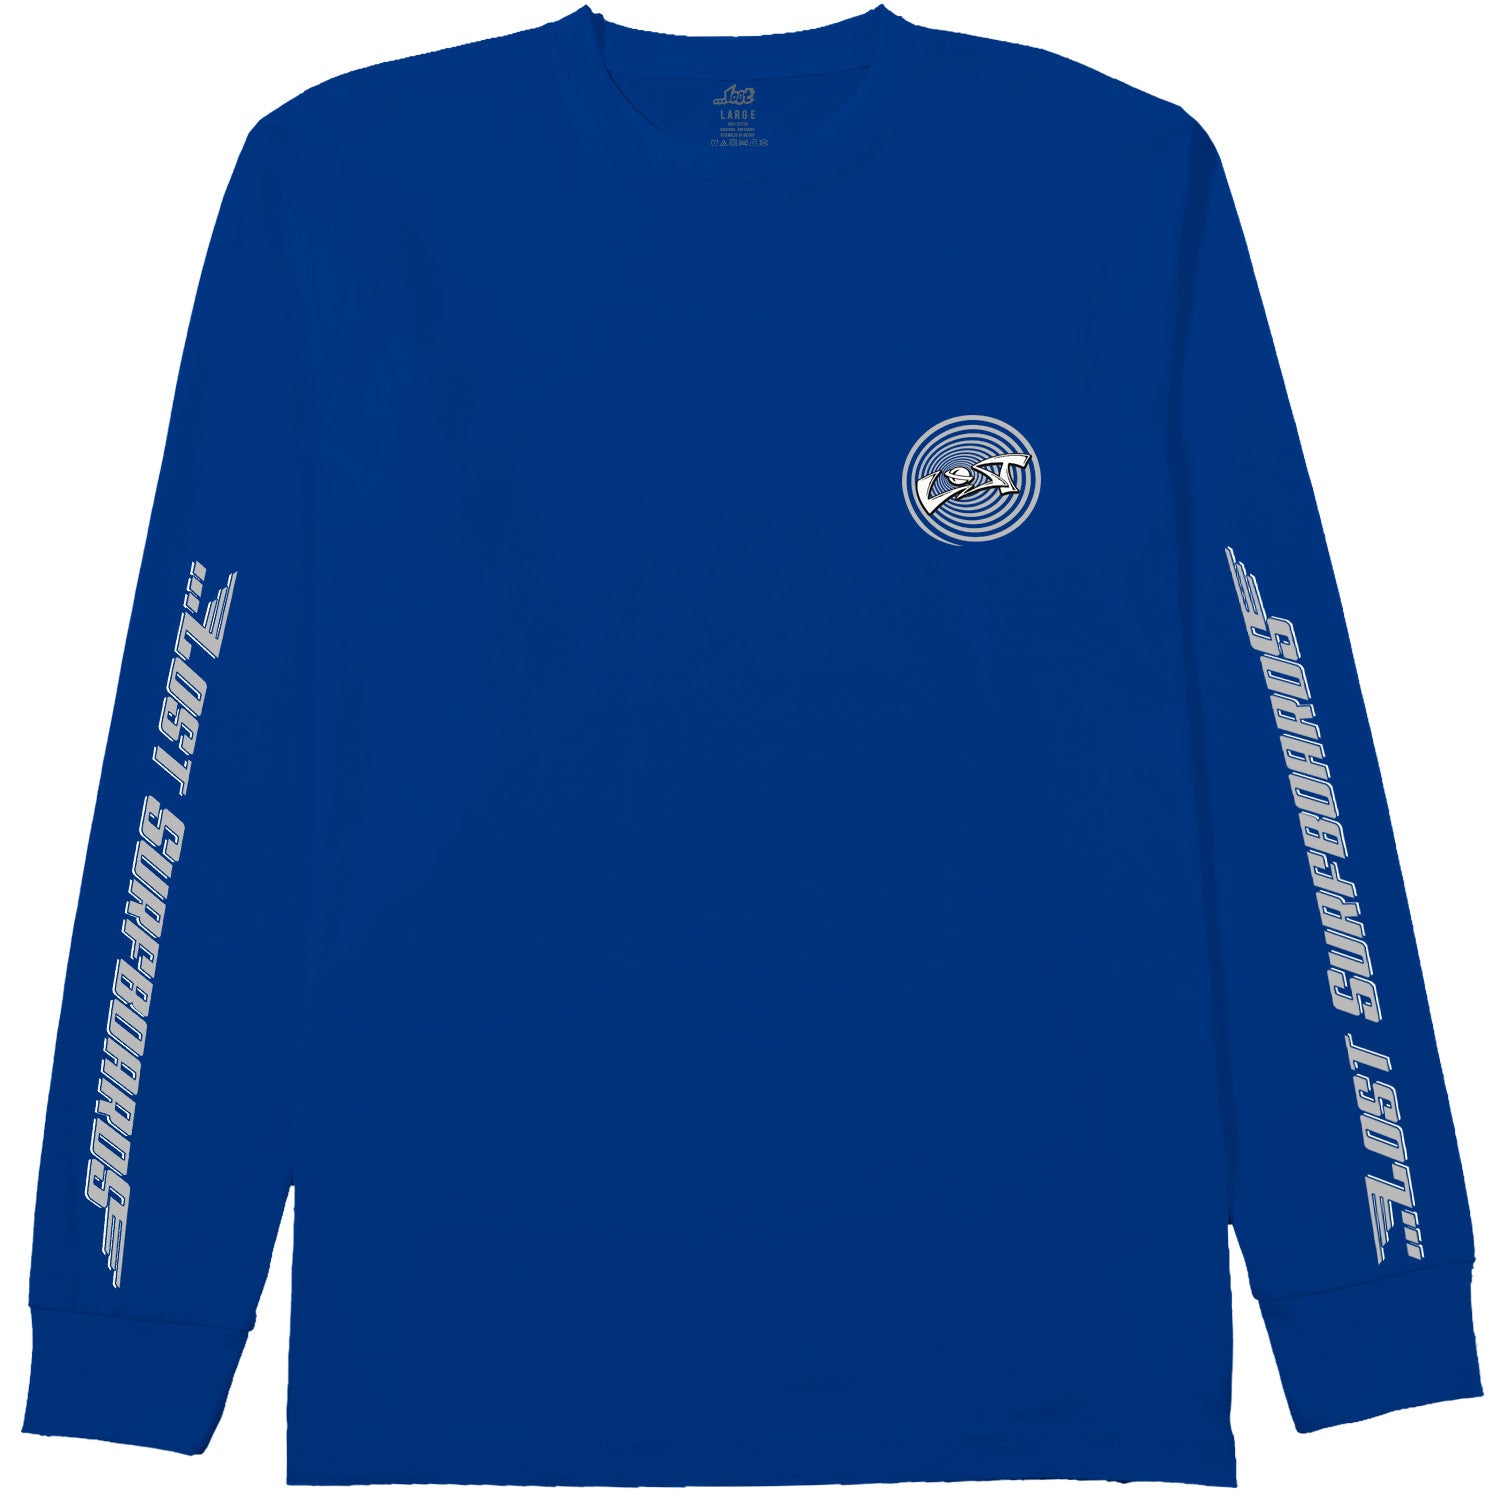 Team Lost Long Sleeve T-Shirt - Royal with White - ManGo Surfing